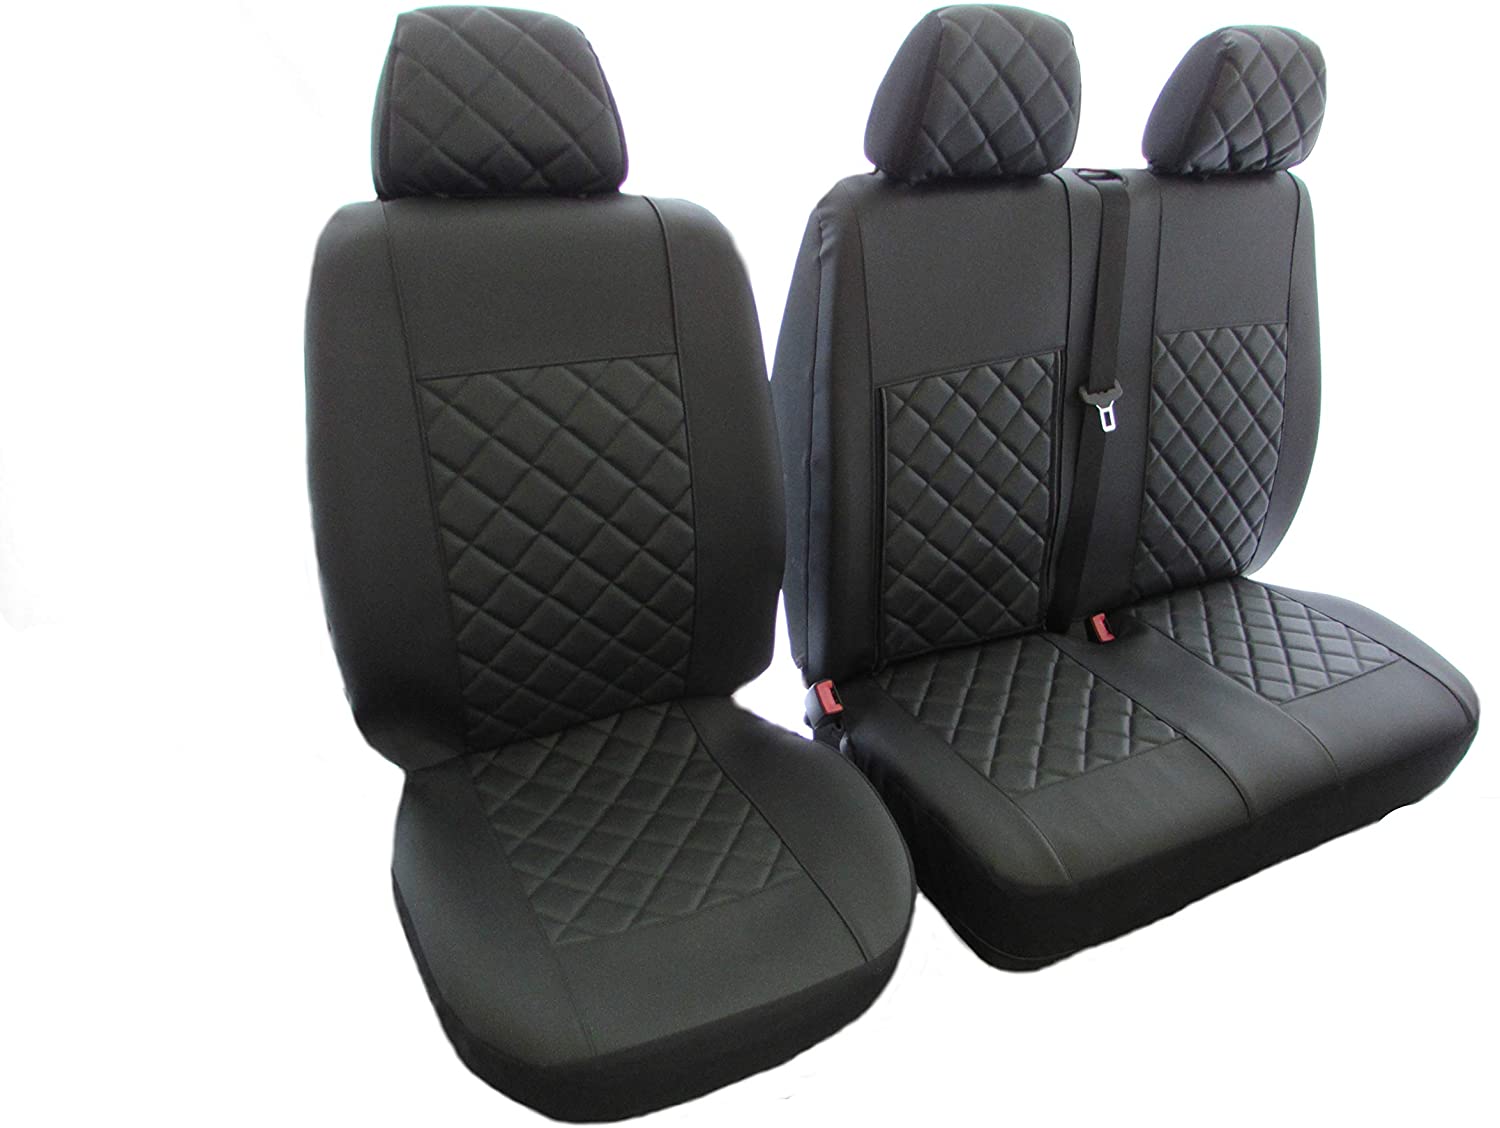 Texmar Designed to fit MERCEDES SPRINTER 2002-2006, VW CRAFTER 2002-2006  RHD BLACK-RED ECO LEATHER Seat Covers 2+1 (1 single 1 double) – Texmar Ltd.